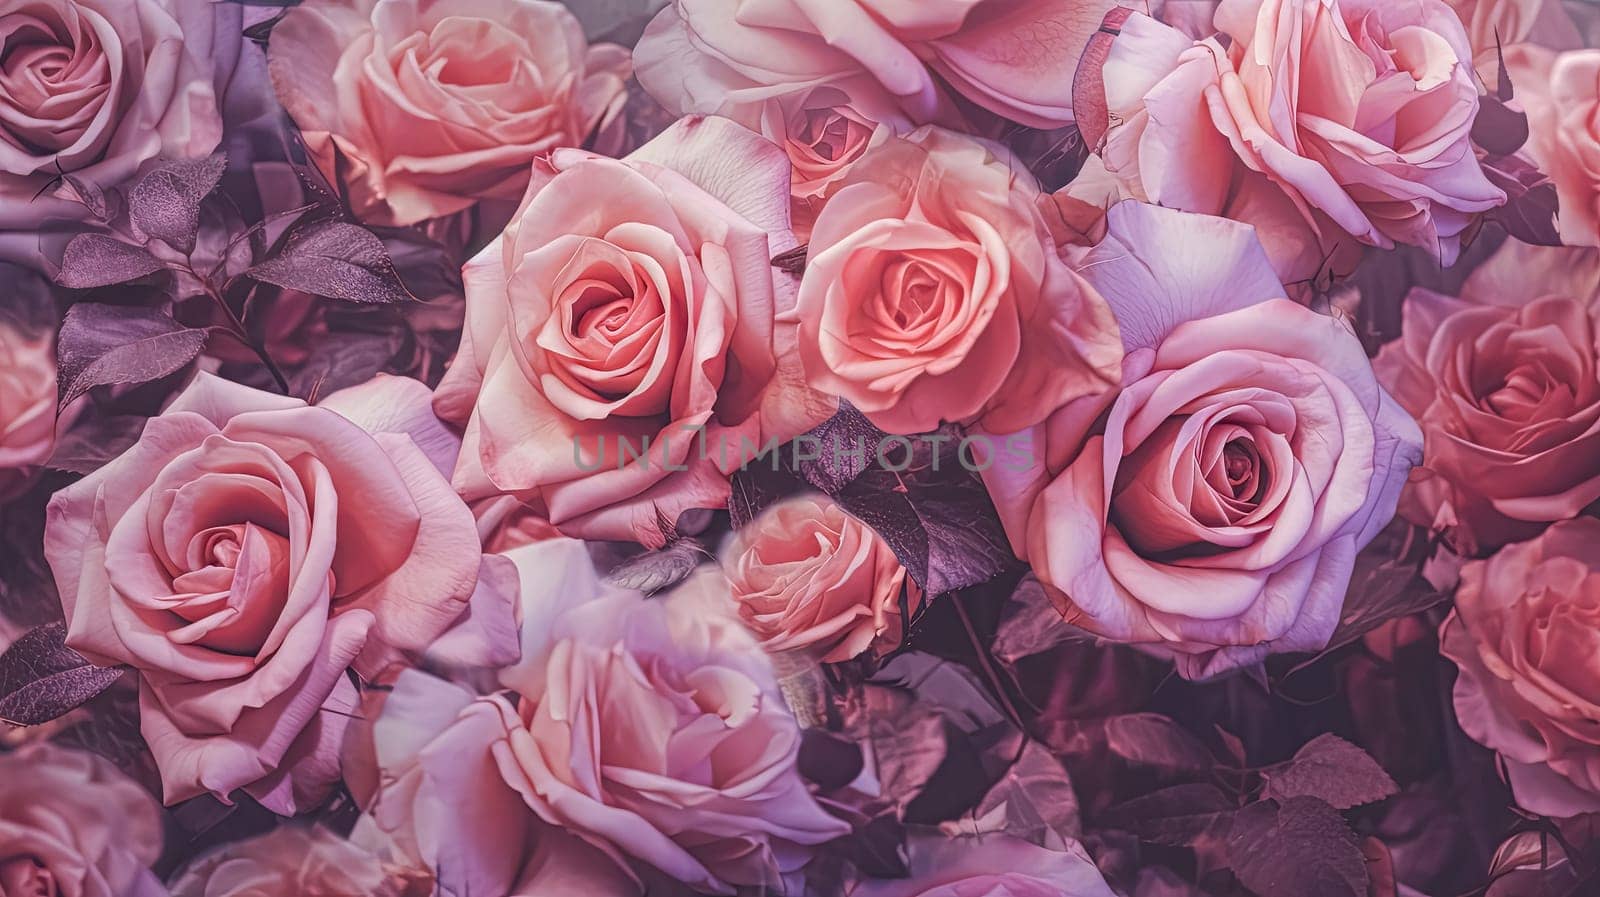 A bouquet of pink roses with a purple background. The roses are arranged in a way that they are overlapping each other, creating a sense of depth and dimension. Scene is one of beauty and elegance